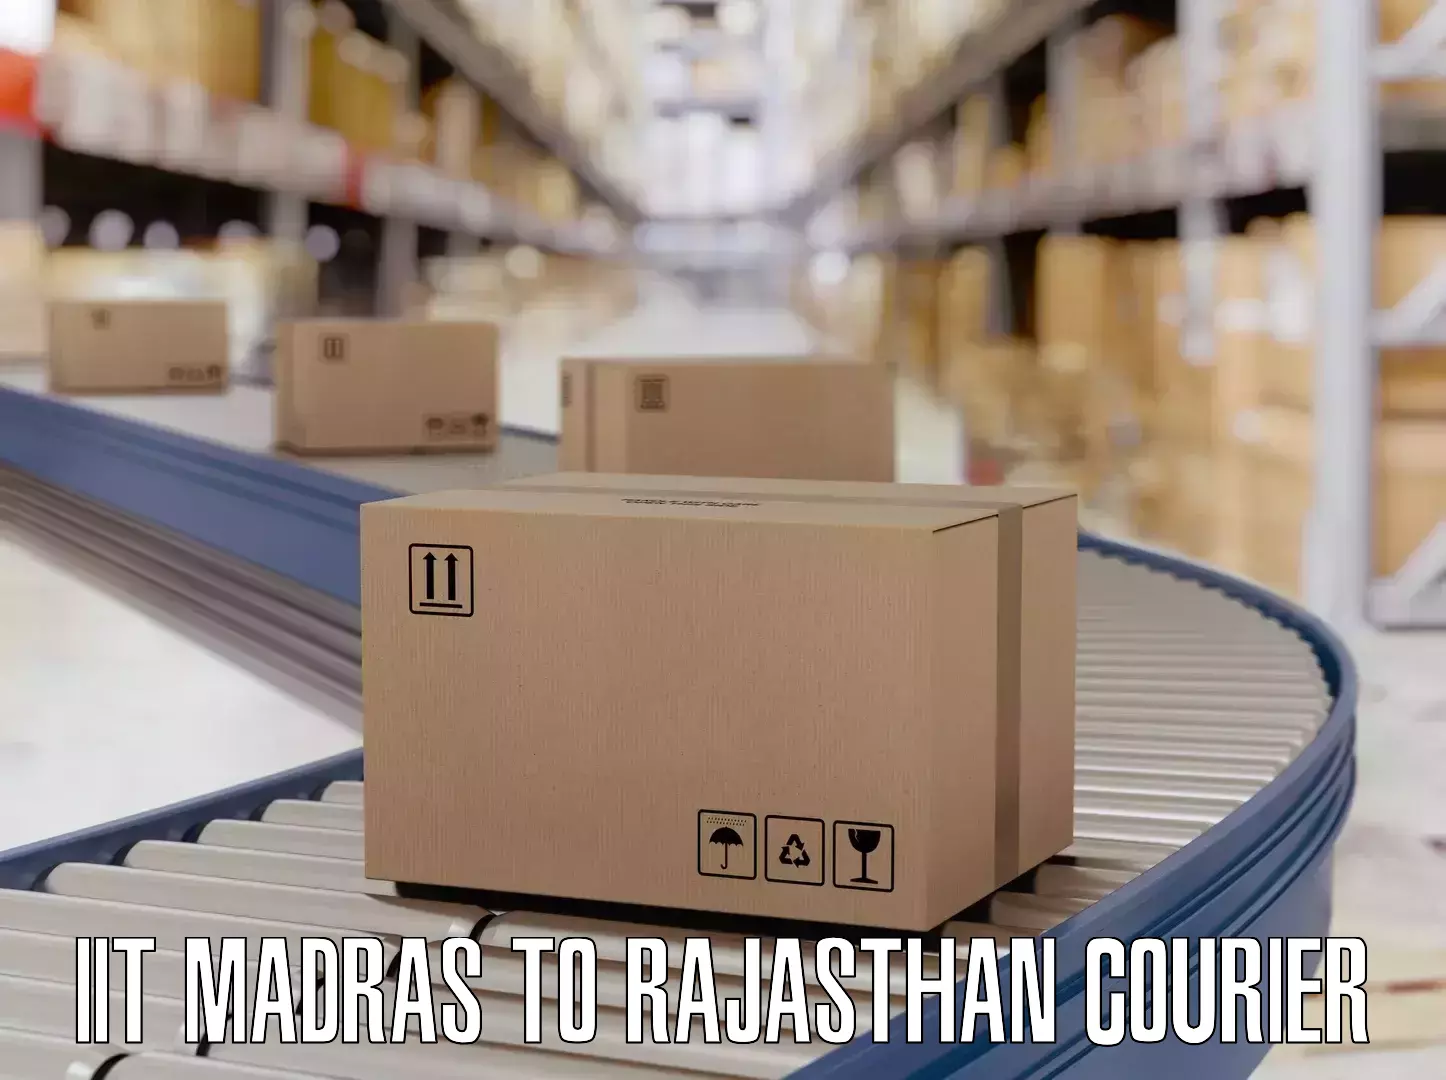 Luggage transfer service IIT Madras to Rajasthan